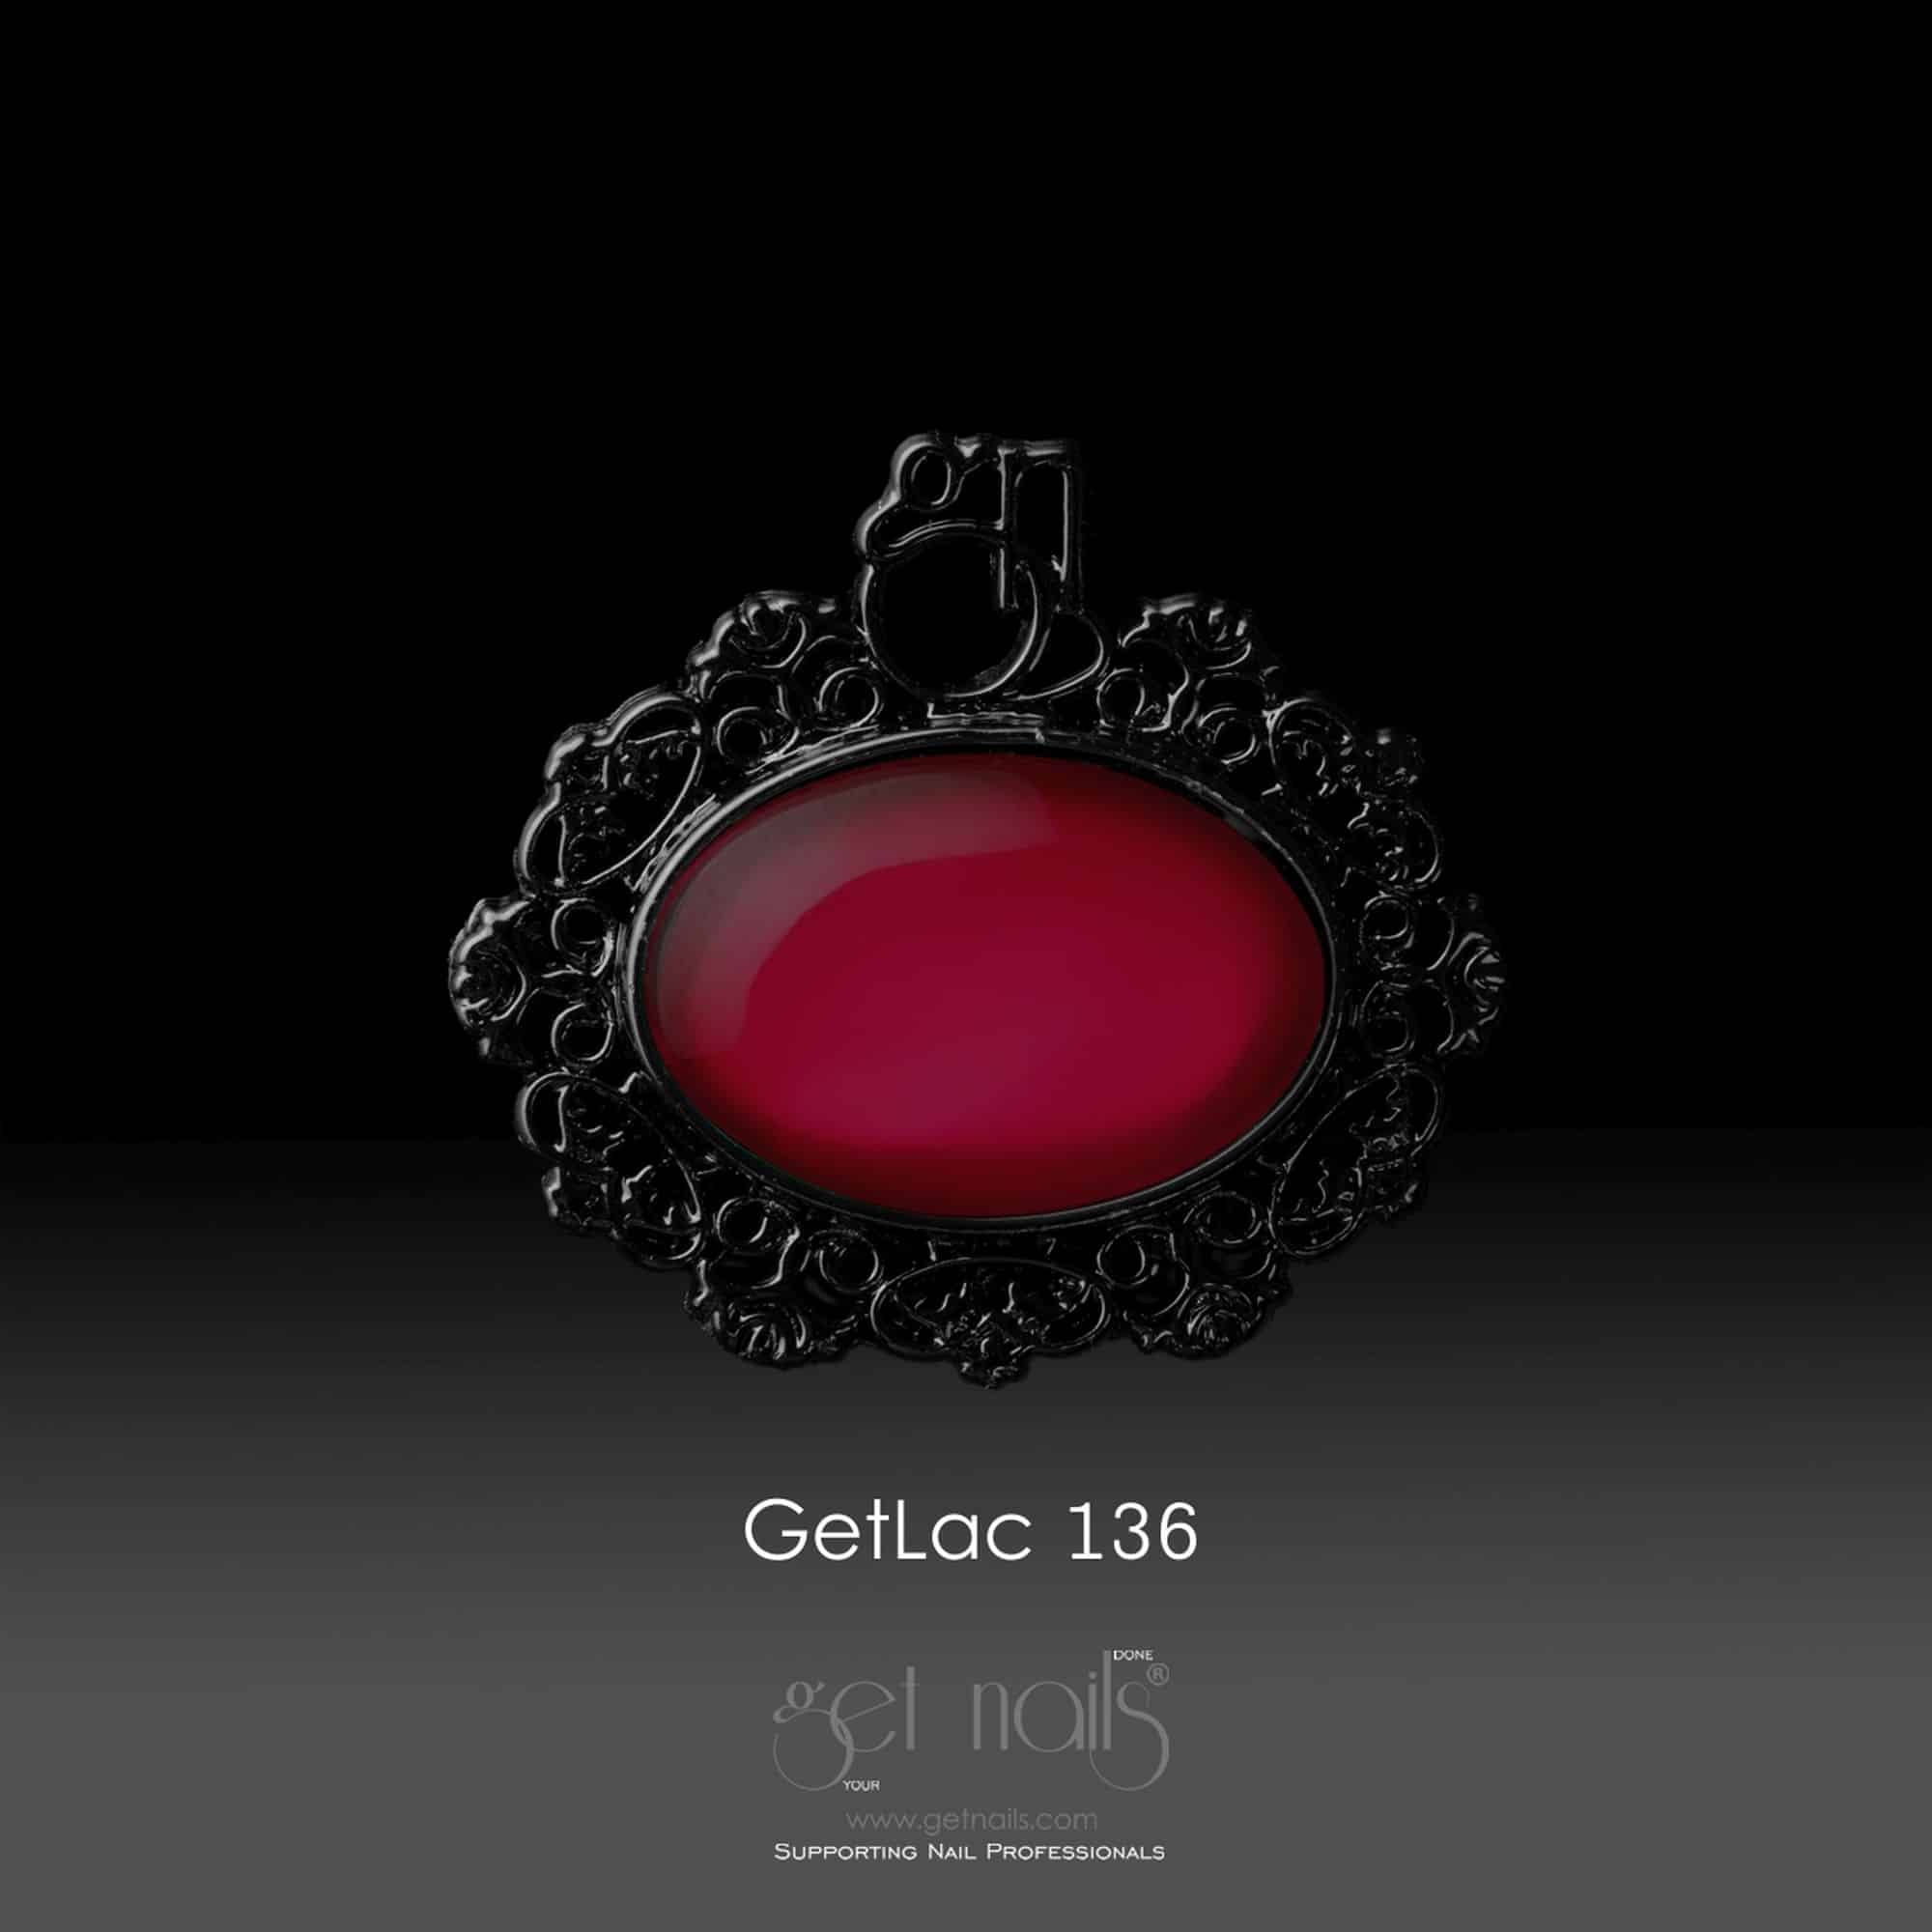 GetLac 136 Haute Red 15 g